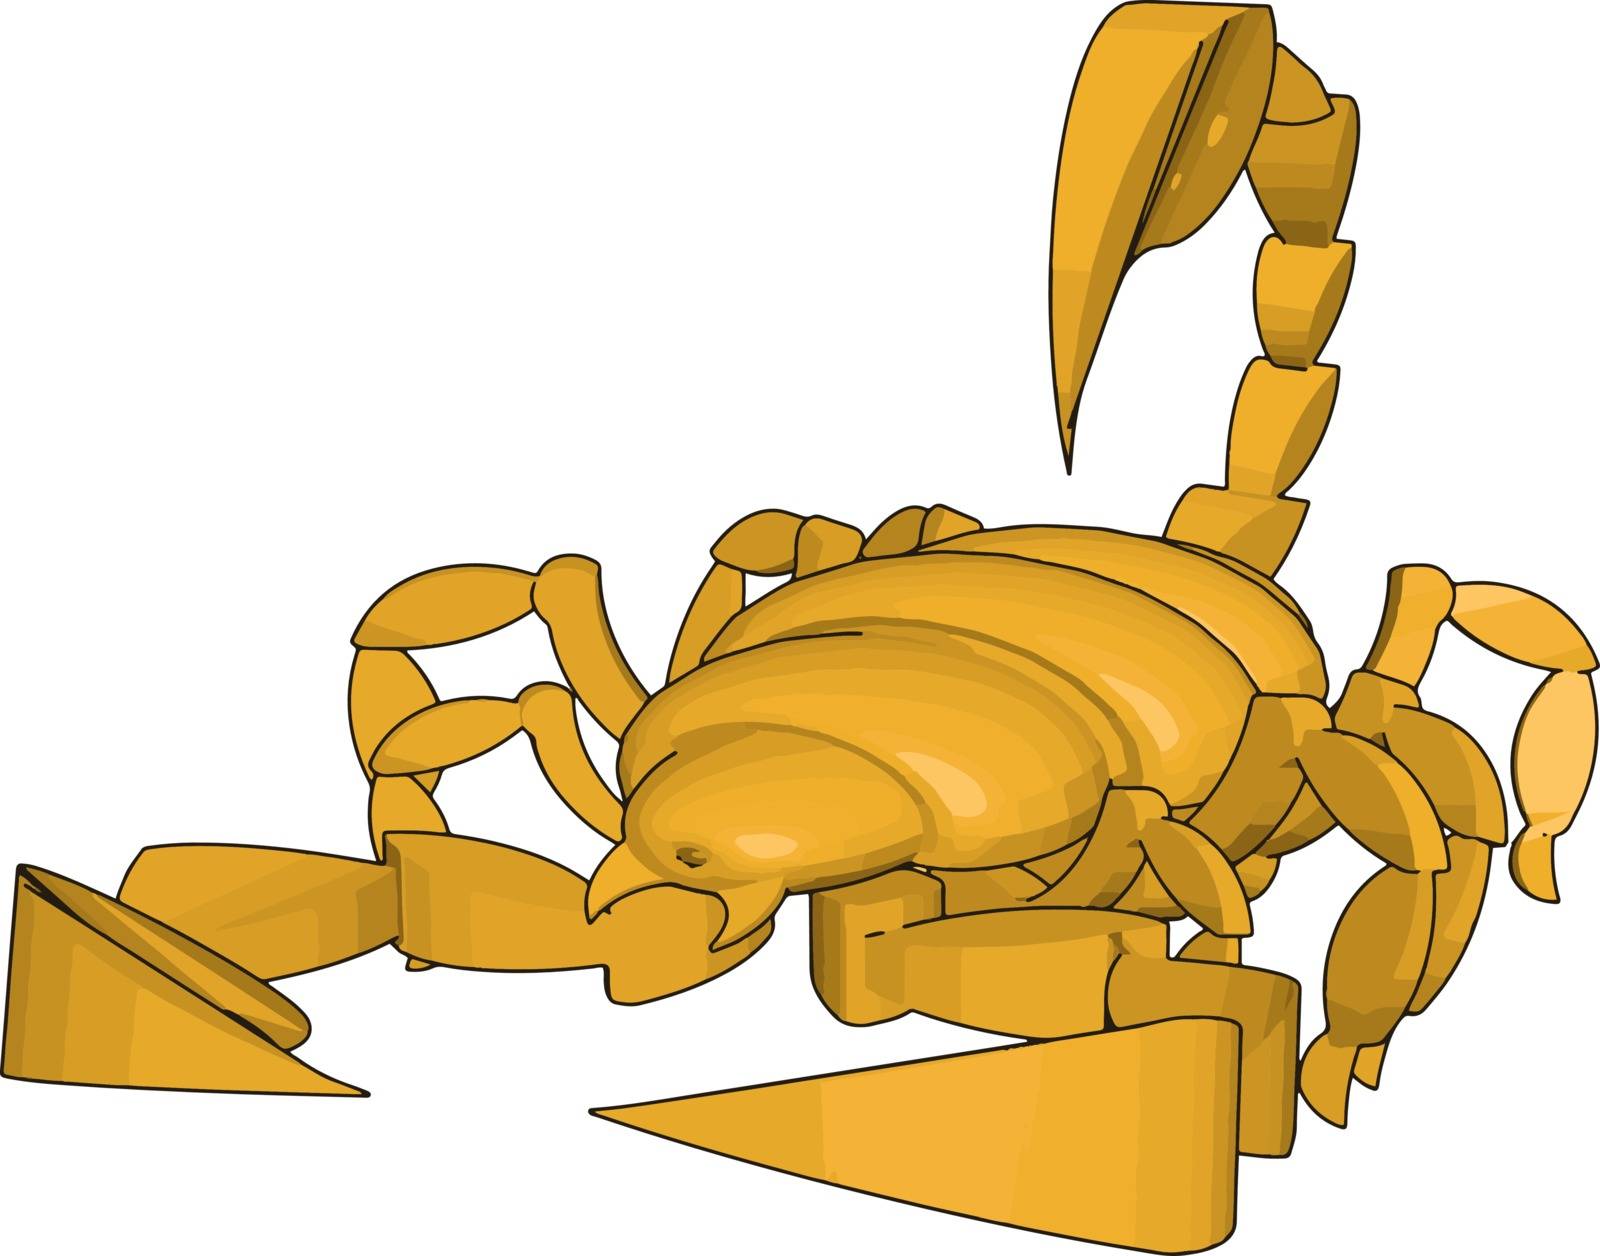 Mode of a 3d scorpion, illustration, vector on white background.